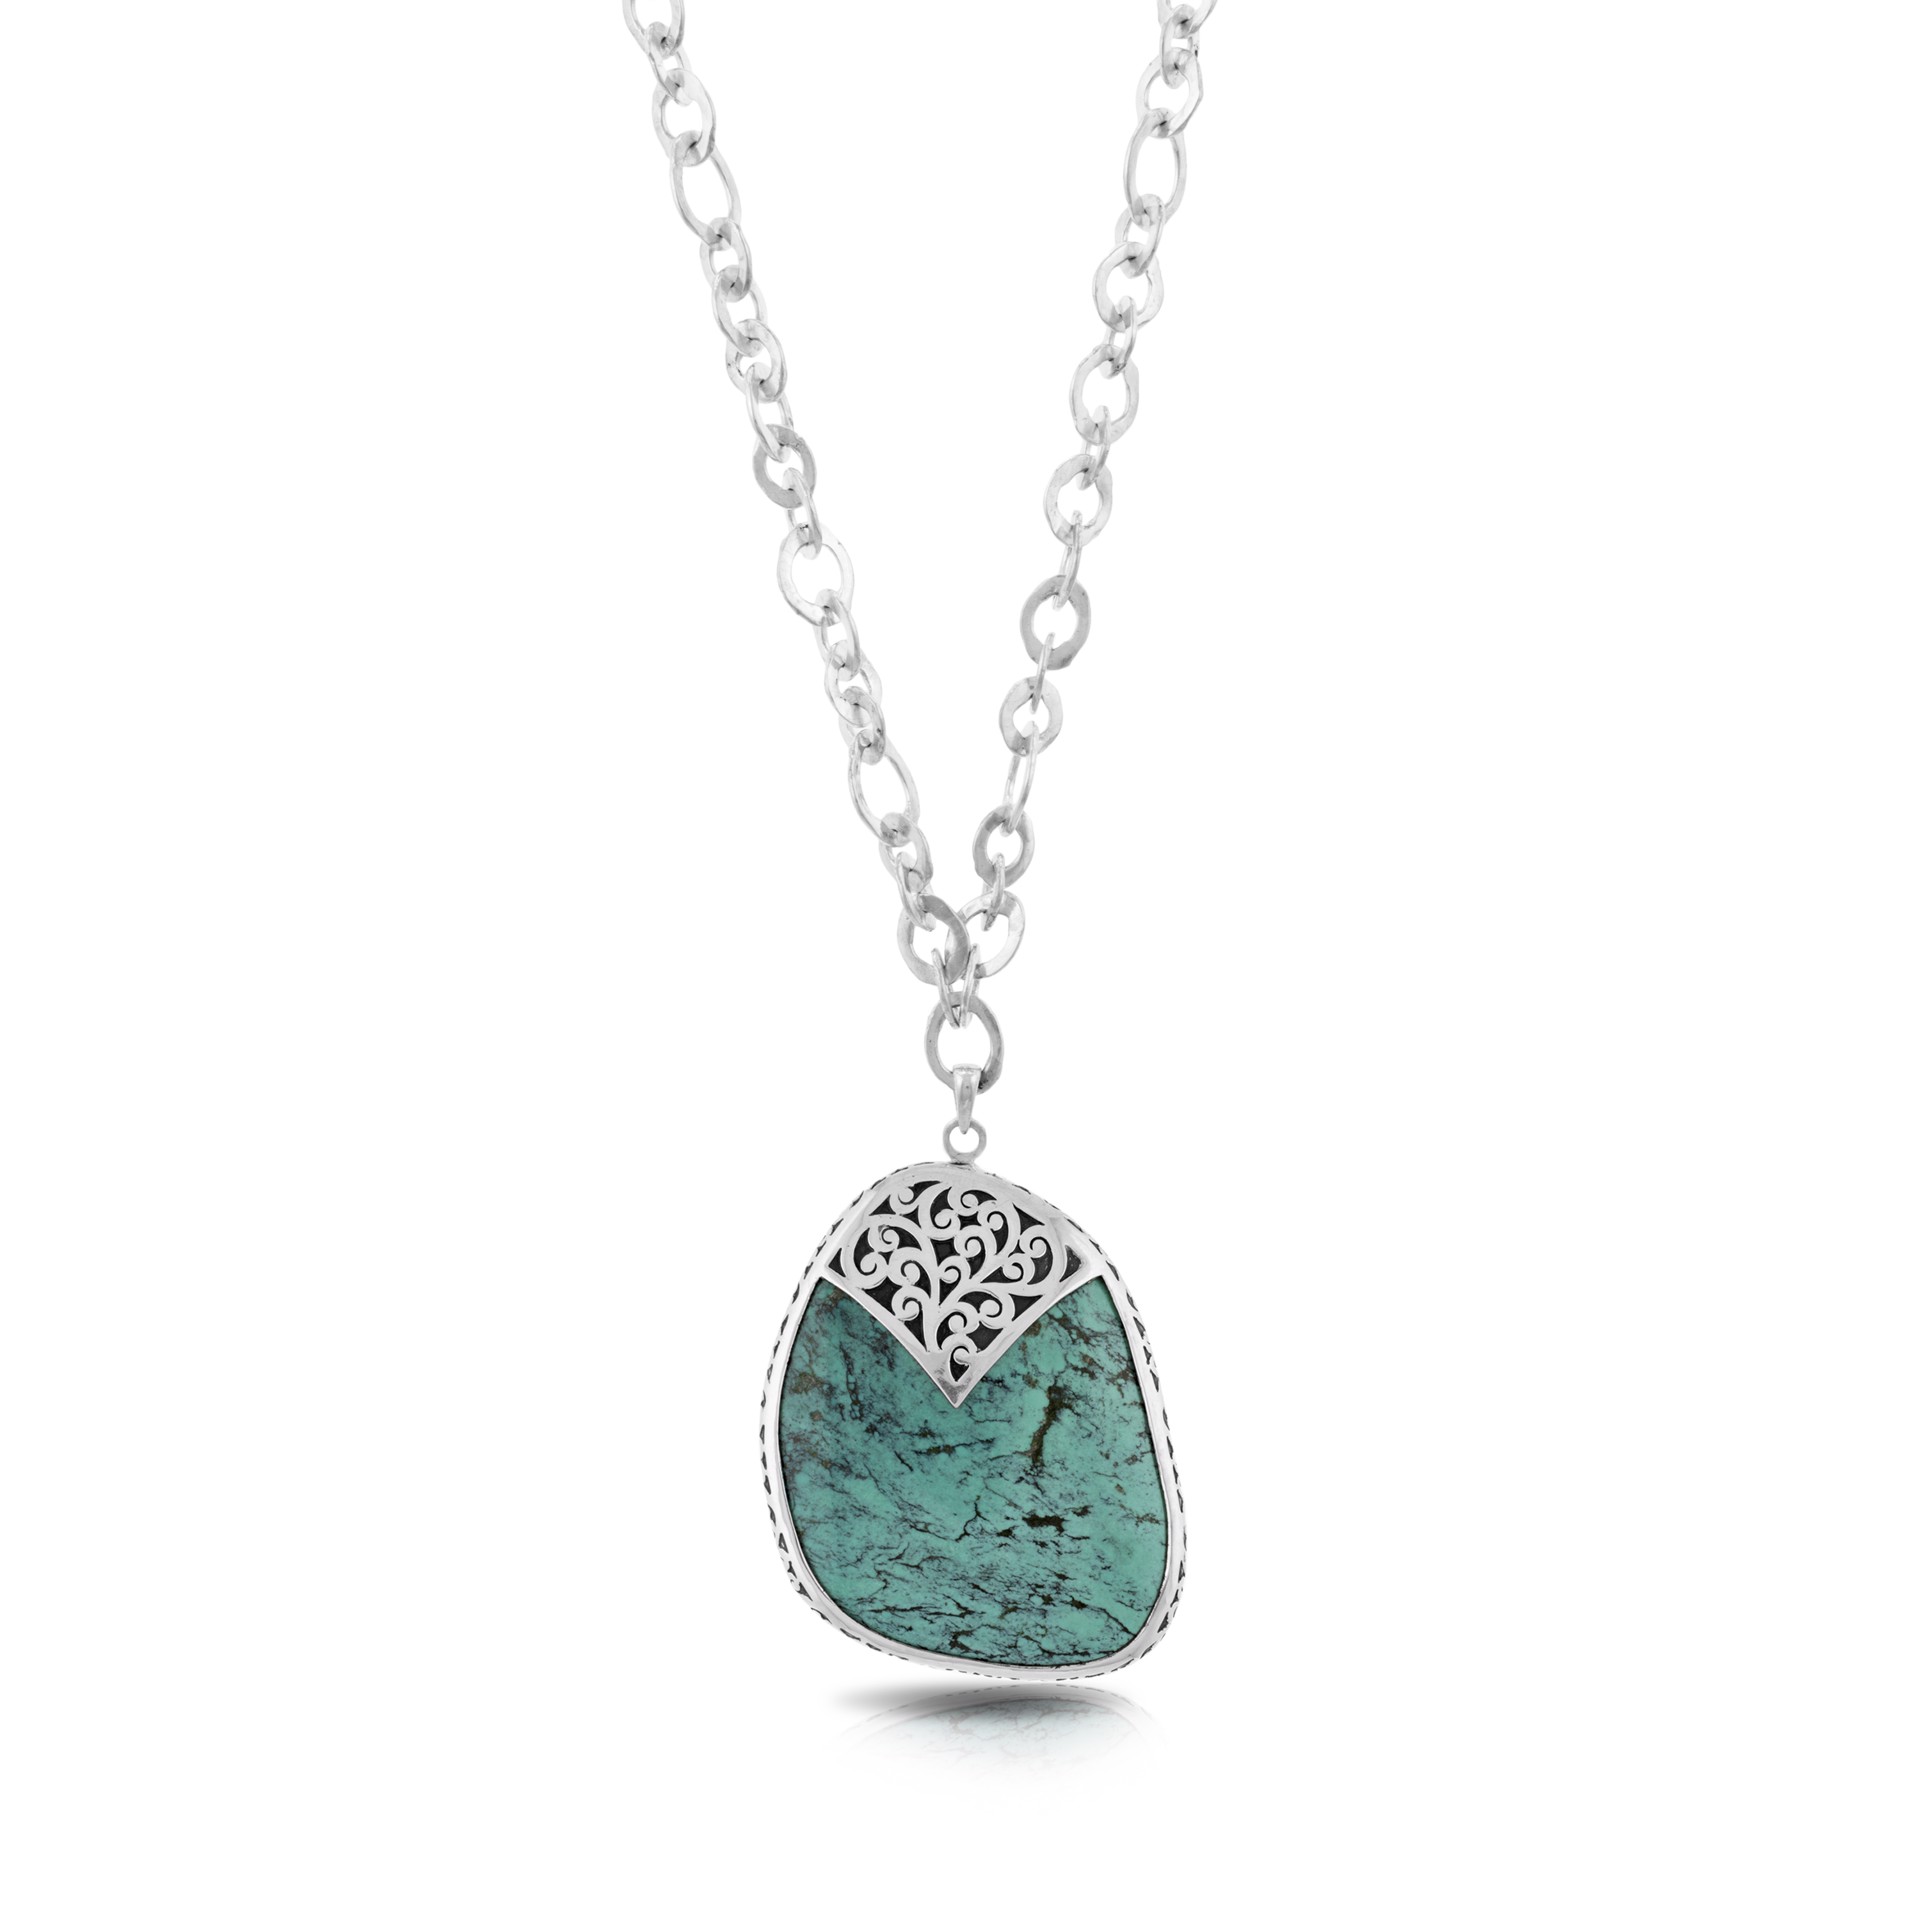 9703 Organic Shaped Turquoise with Hand Carved Scroll Rim on Handmade Sterling Silver Chain, Pendant 41 by 51 mm by Lois Hill